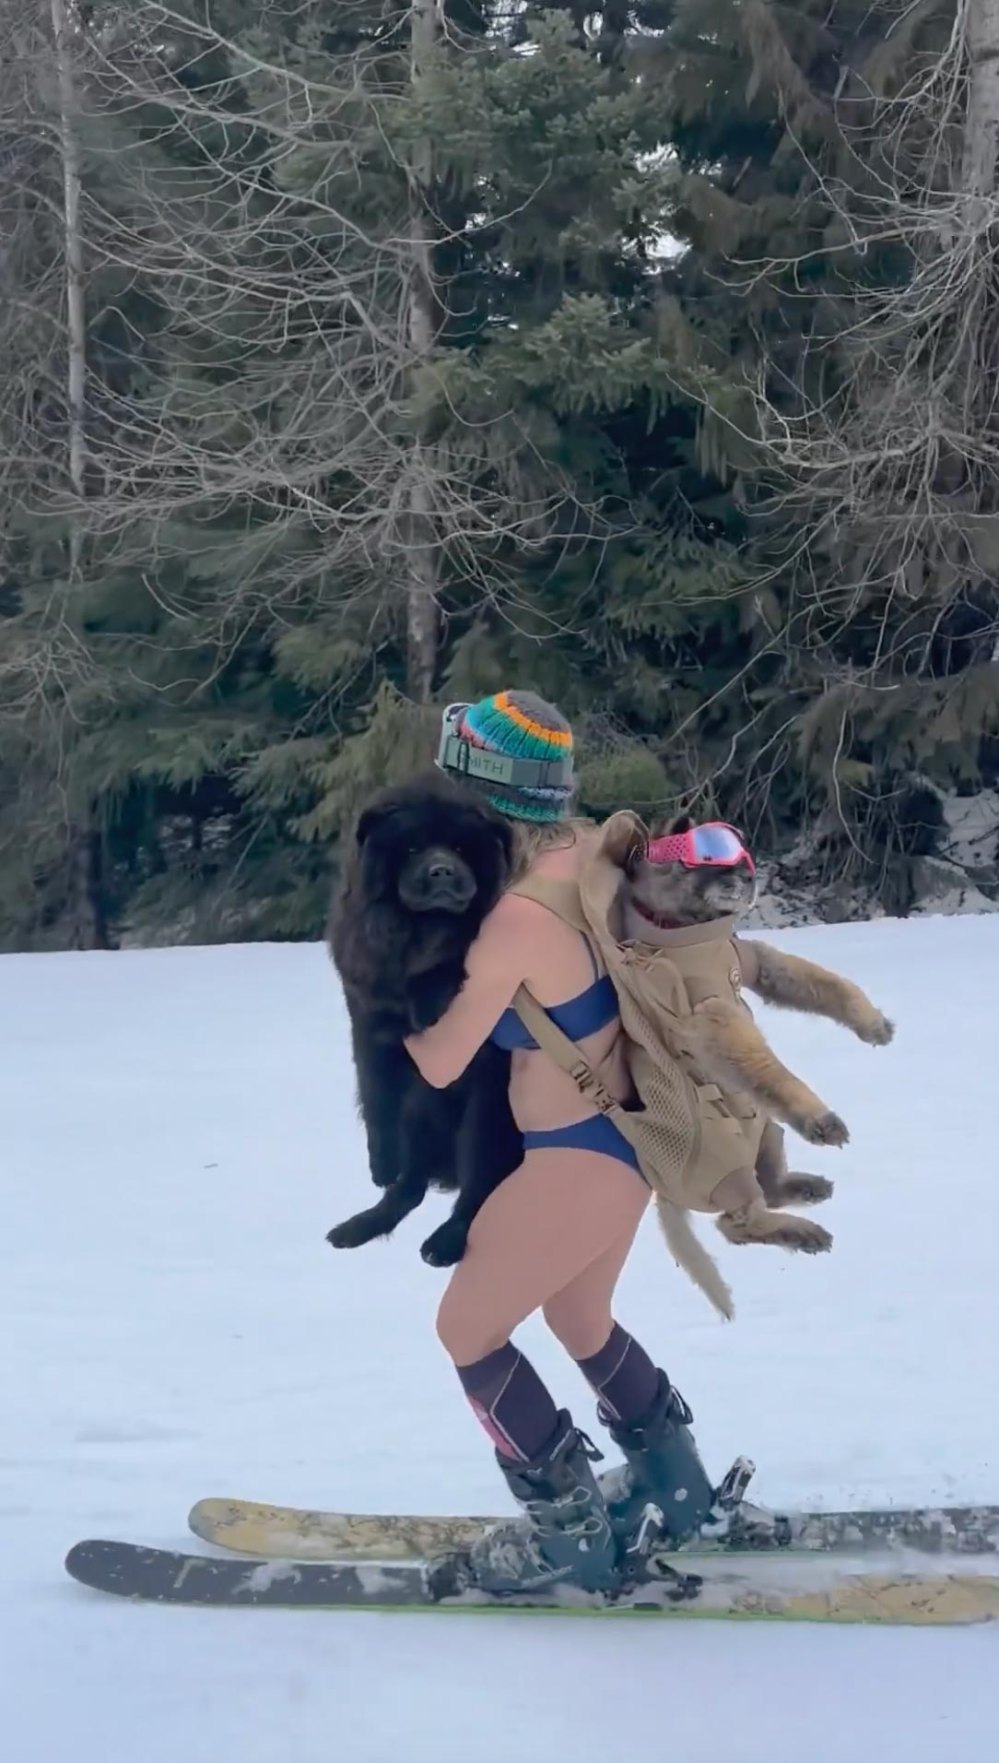 Chelsea Handler Celebrates Her Birthday Skiing in a Bikini Holding Dogs Joint and Drink